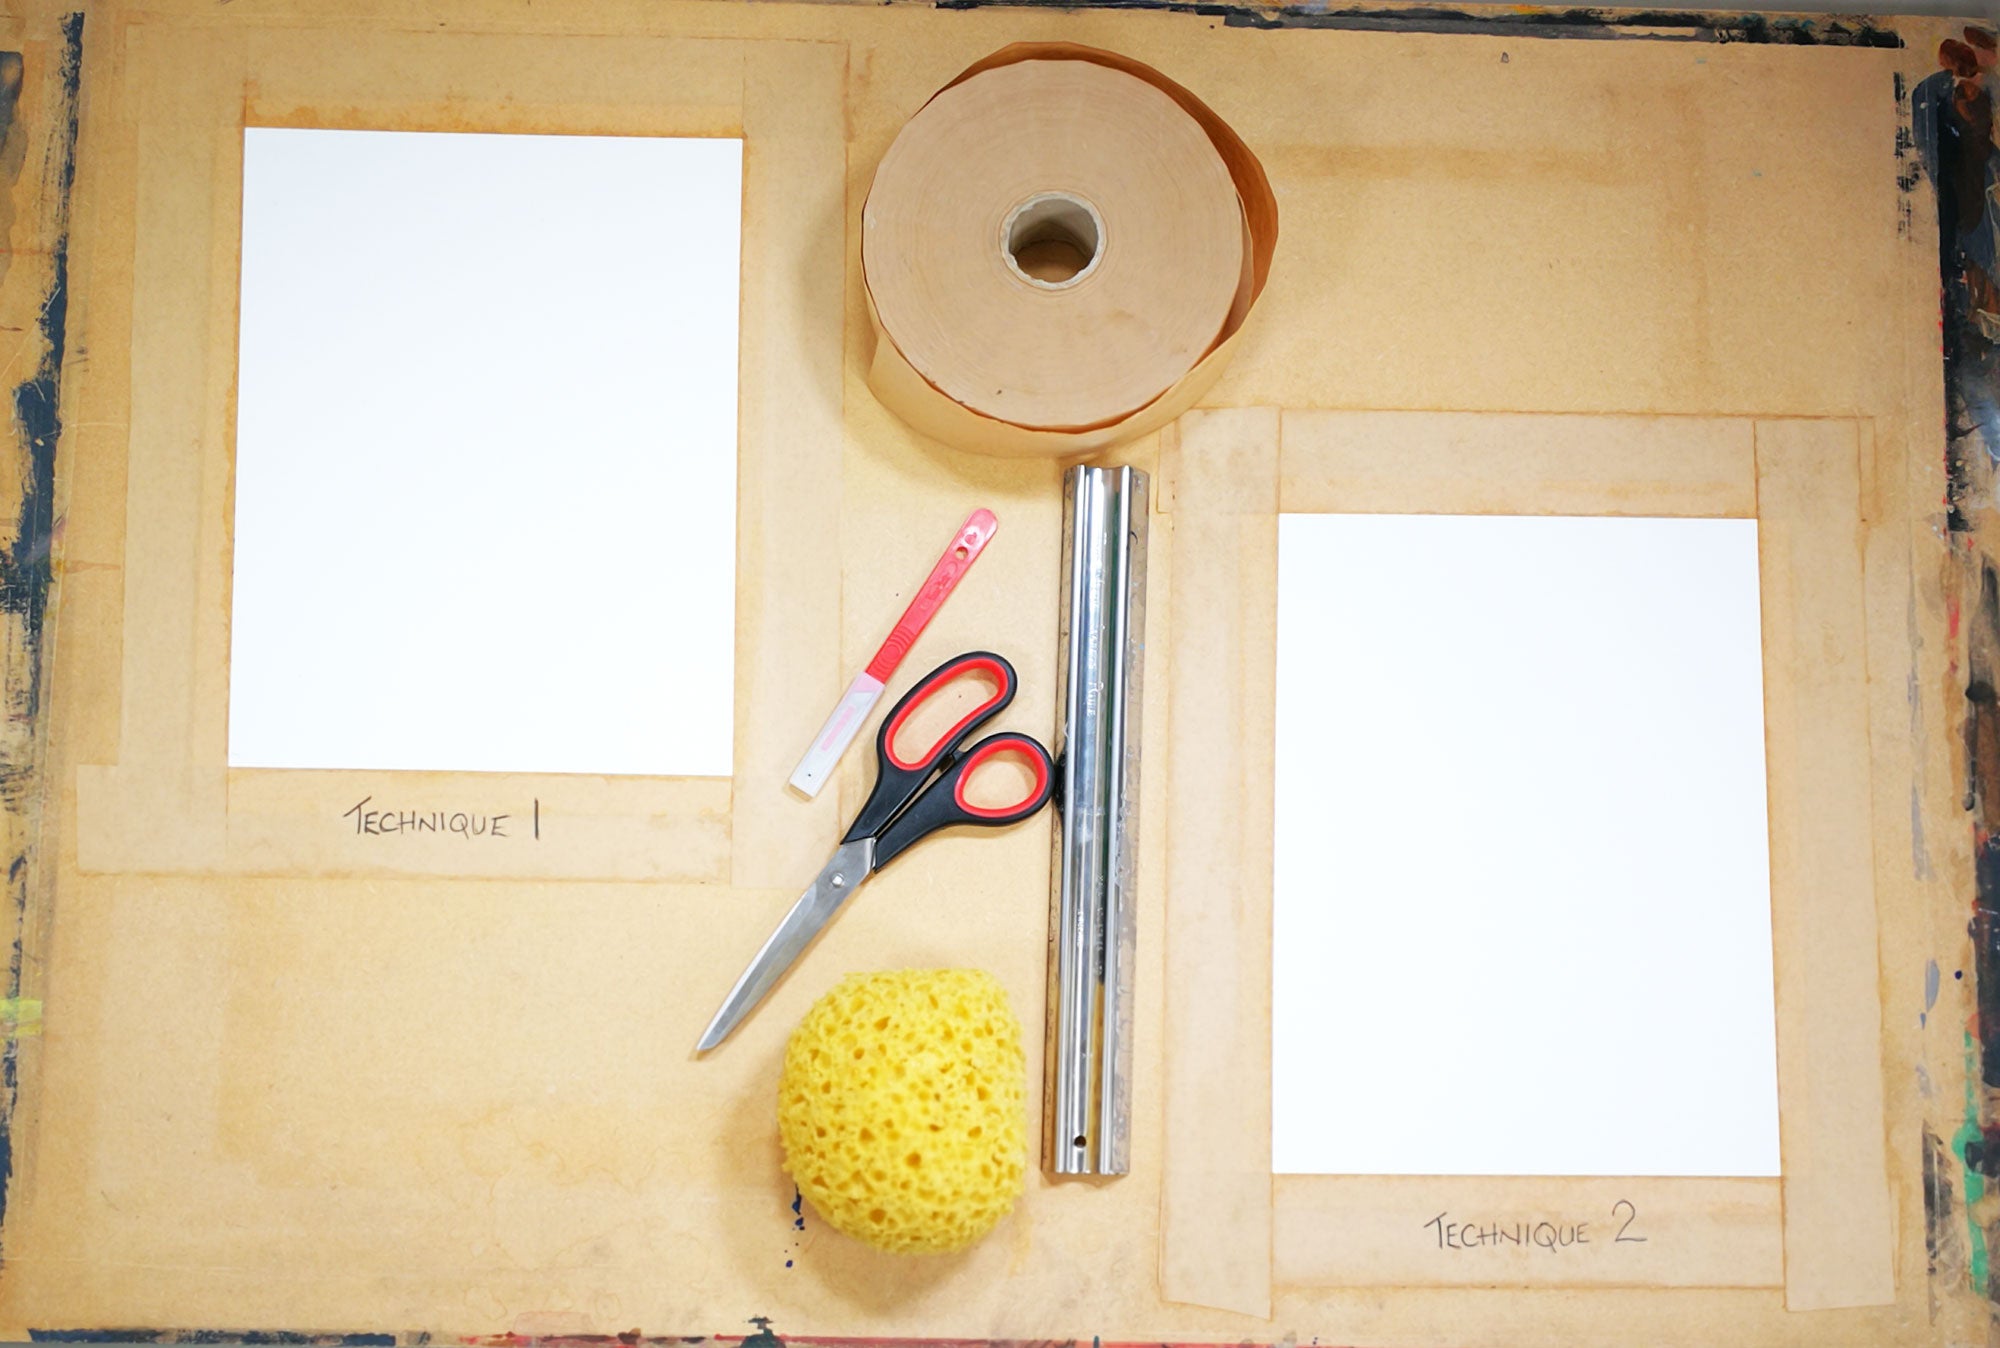 How To Stretch Watercolour Paper